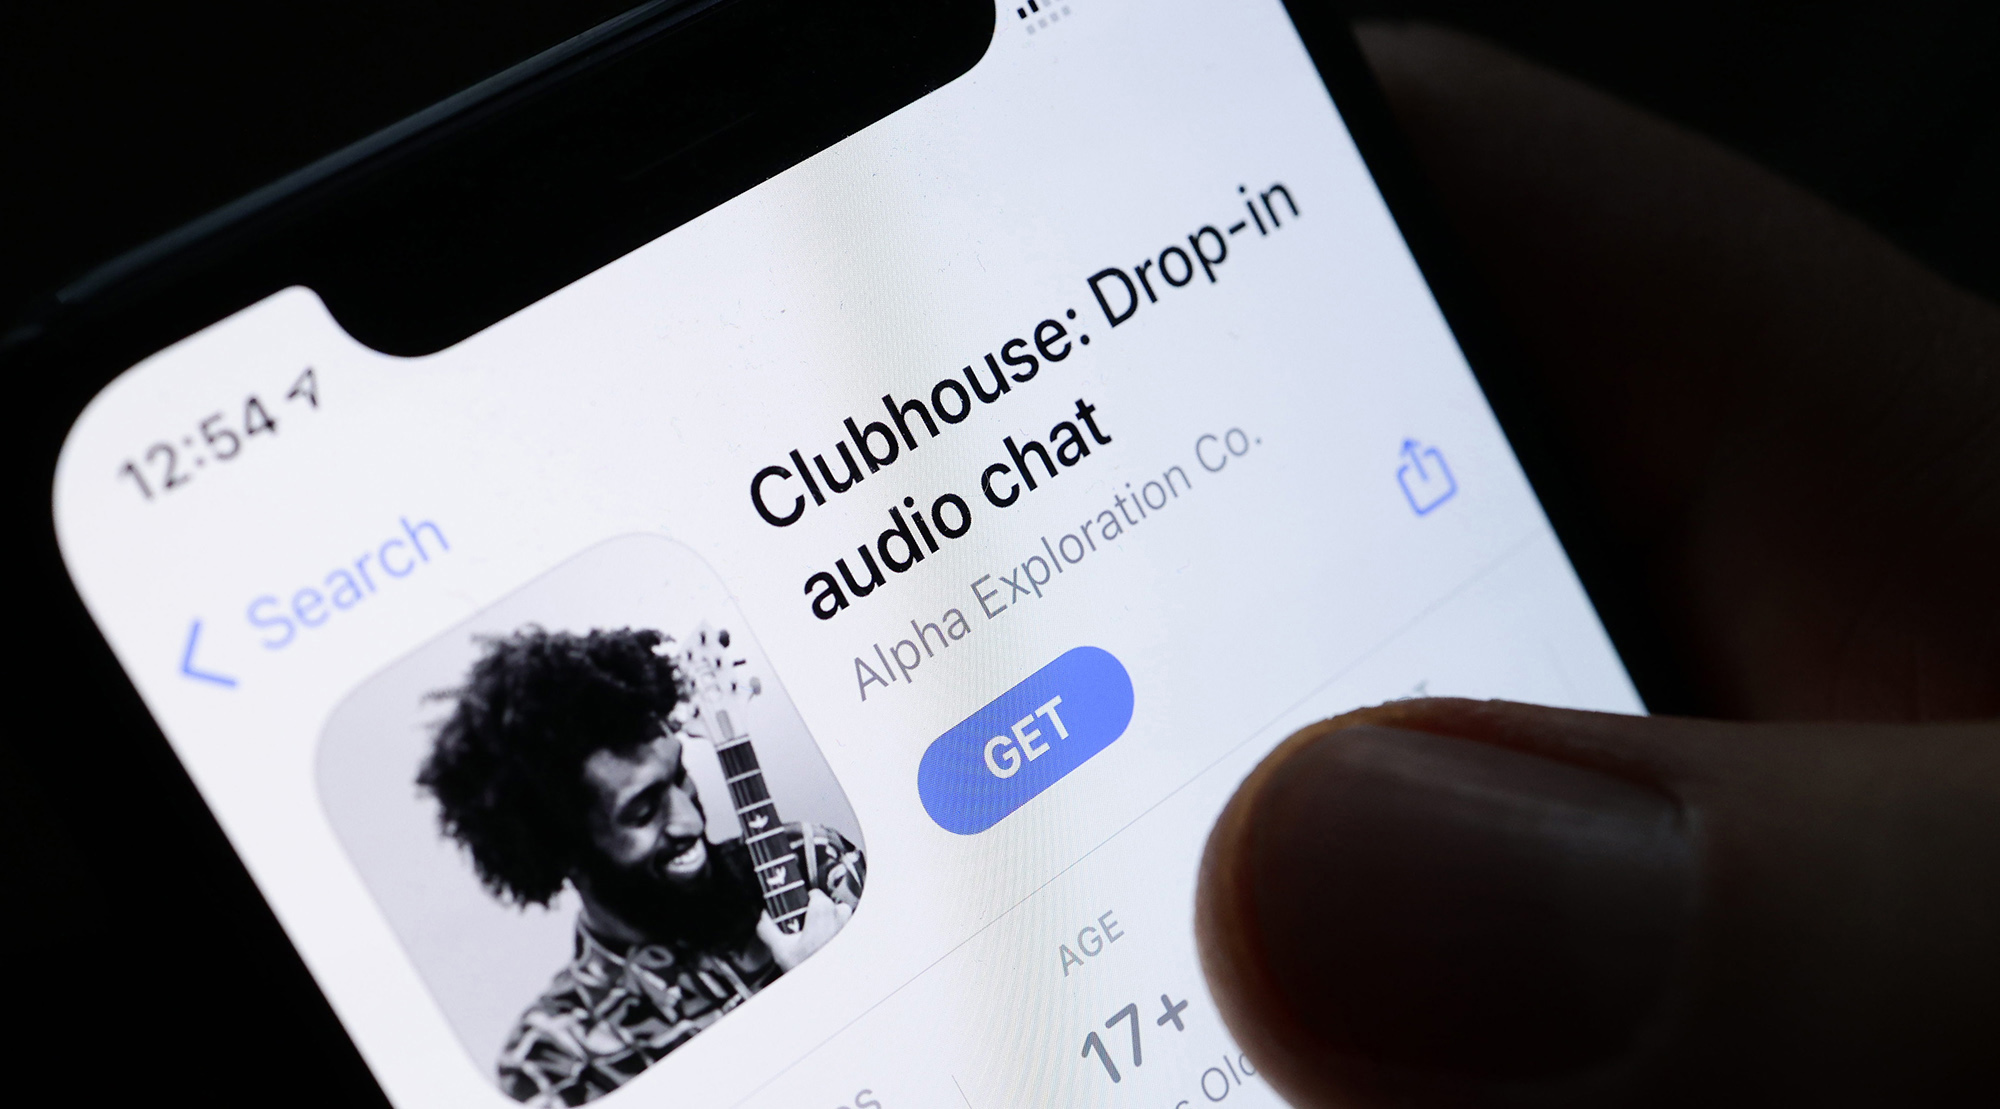 Clubhouse App